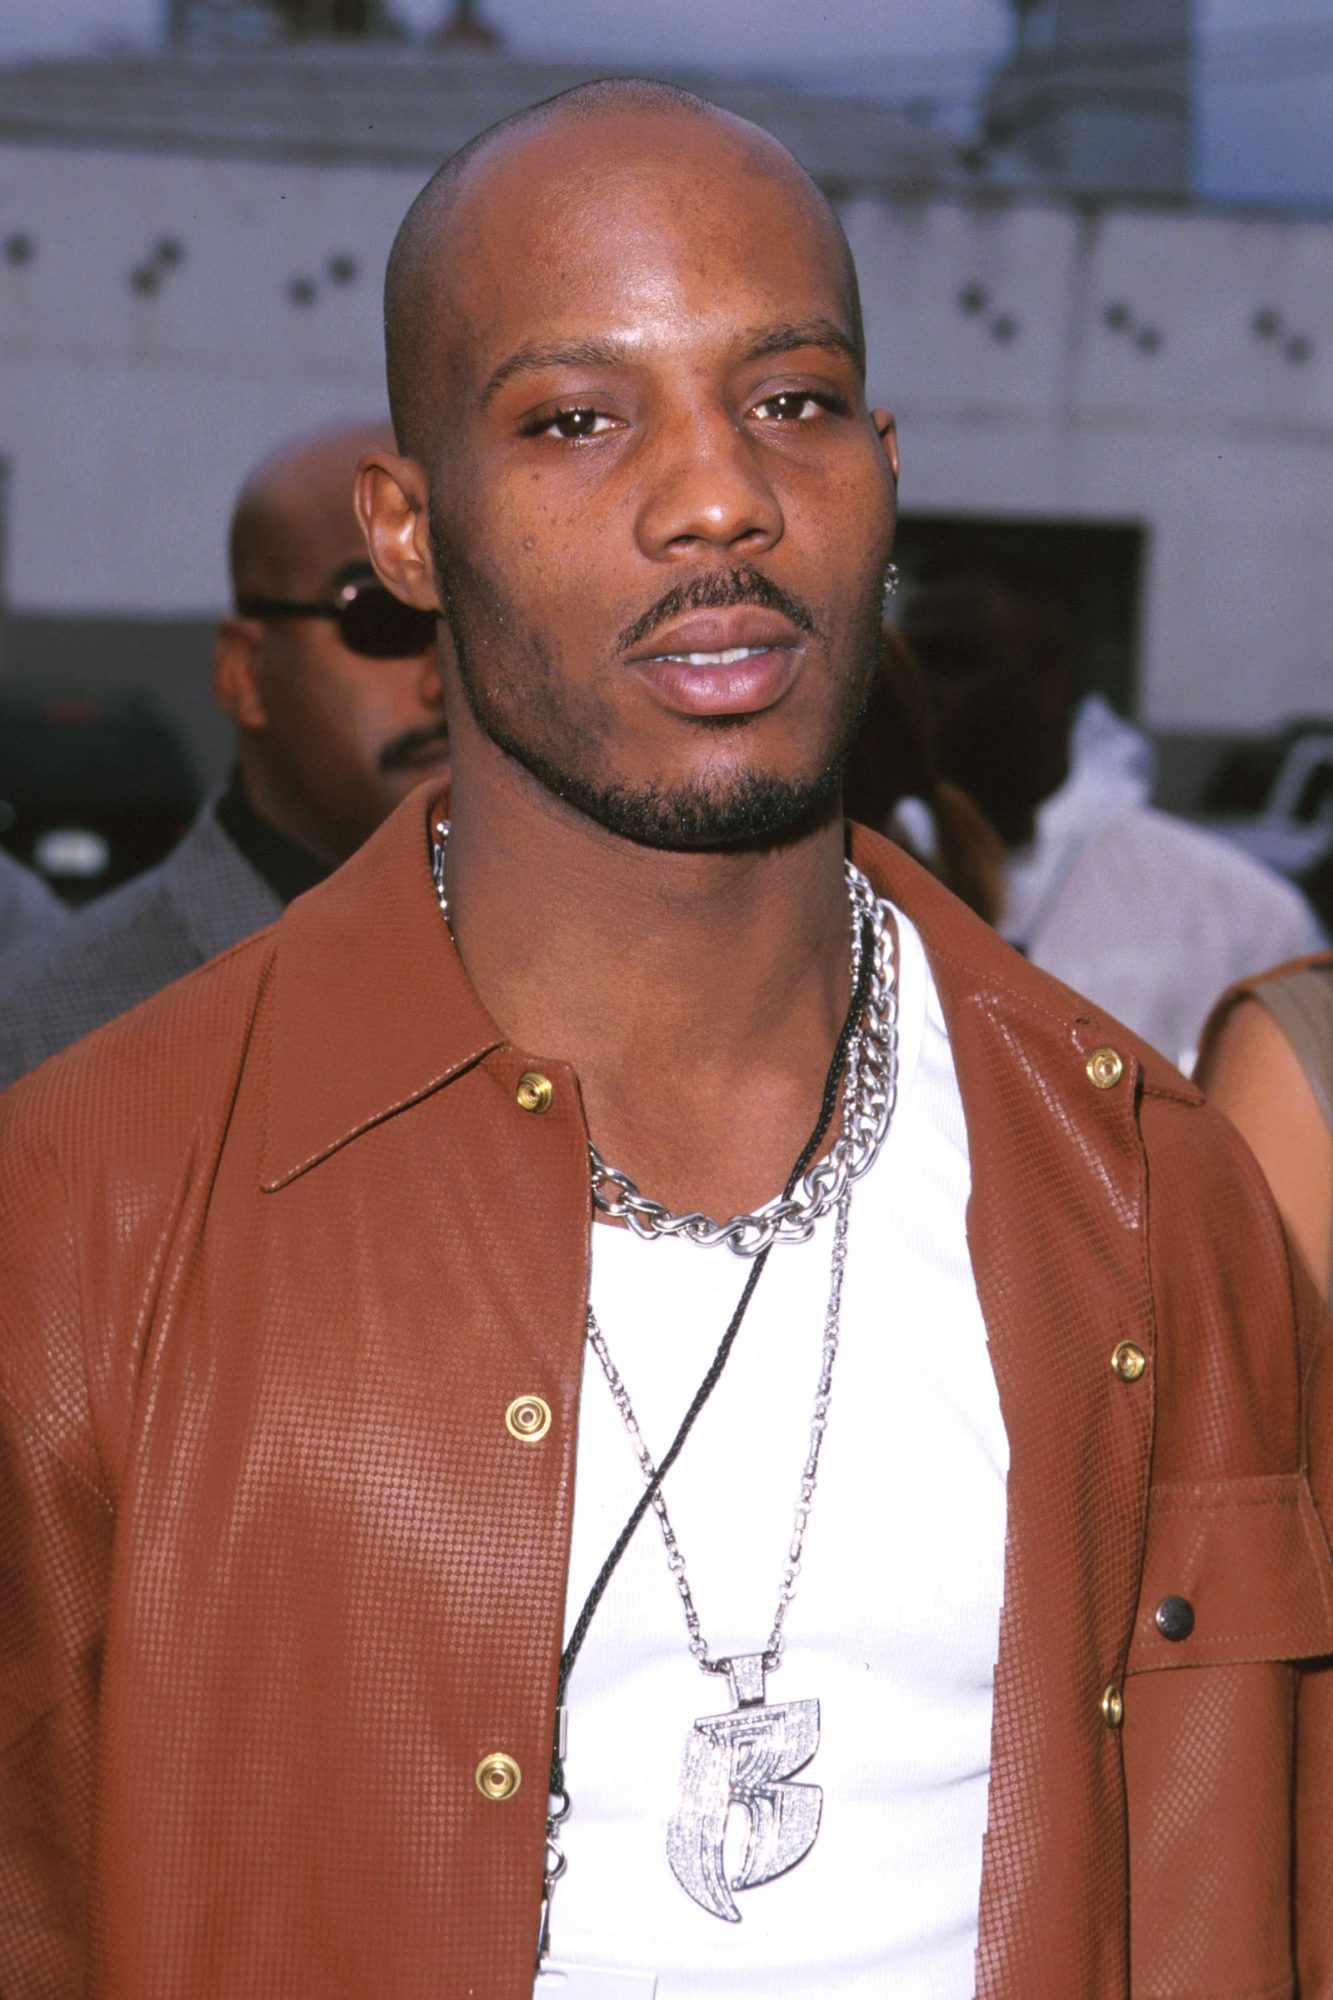 DMX during The 14th Annual Soul Train Music Awards at Shrine Auditorium in Los Angeles, California